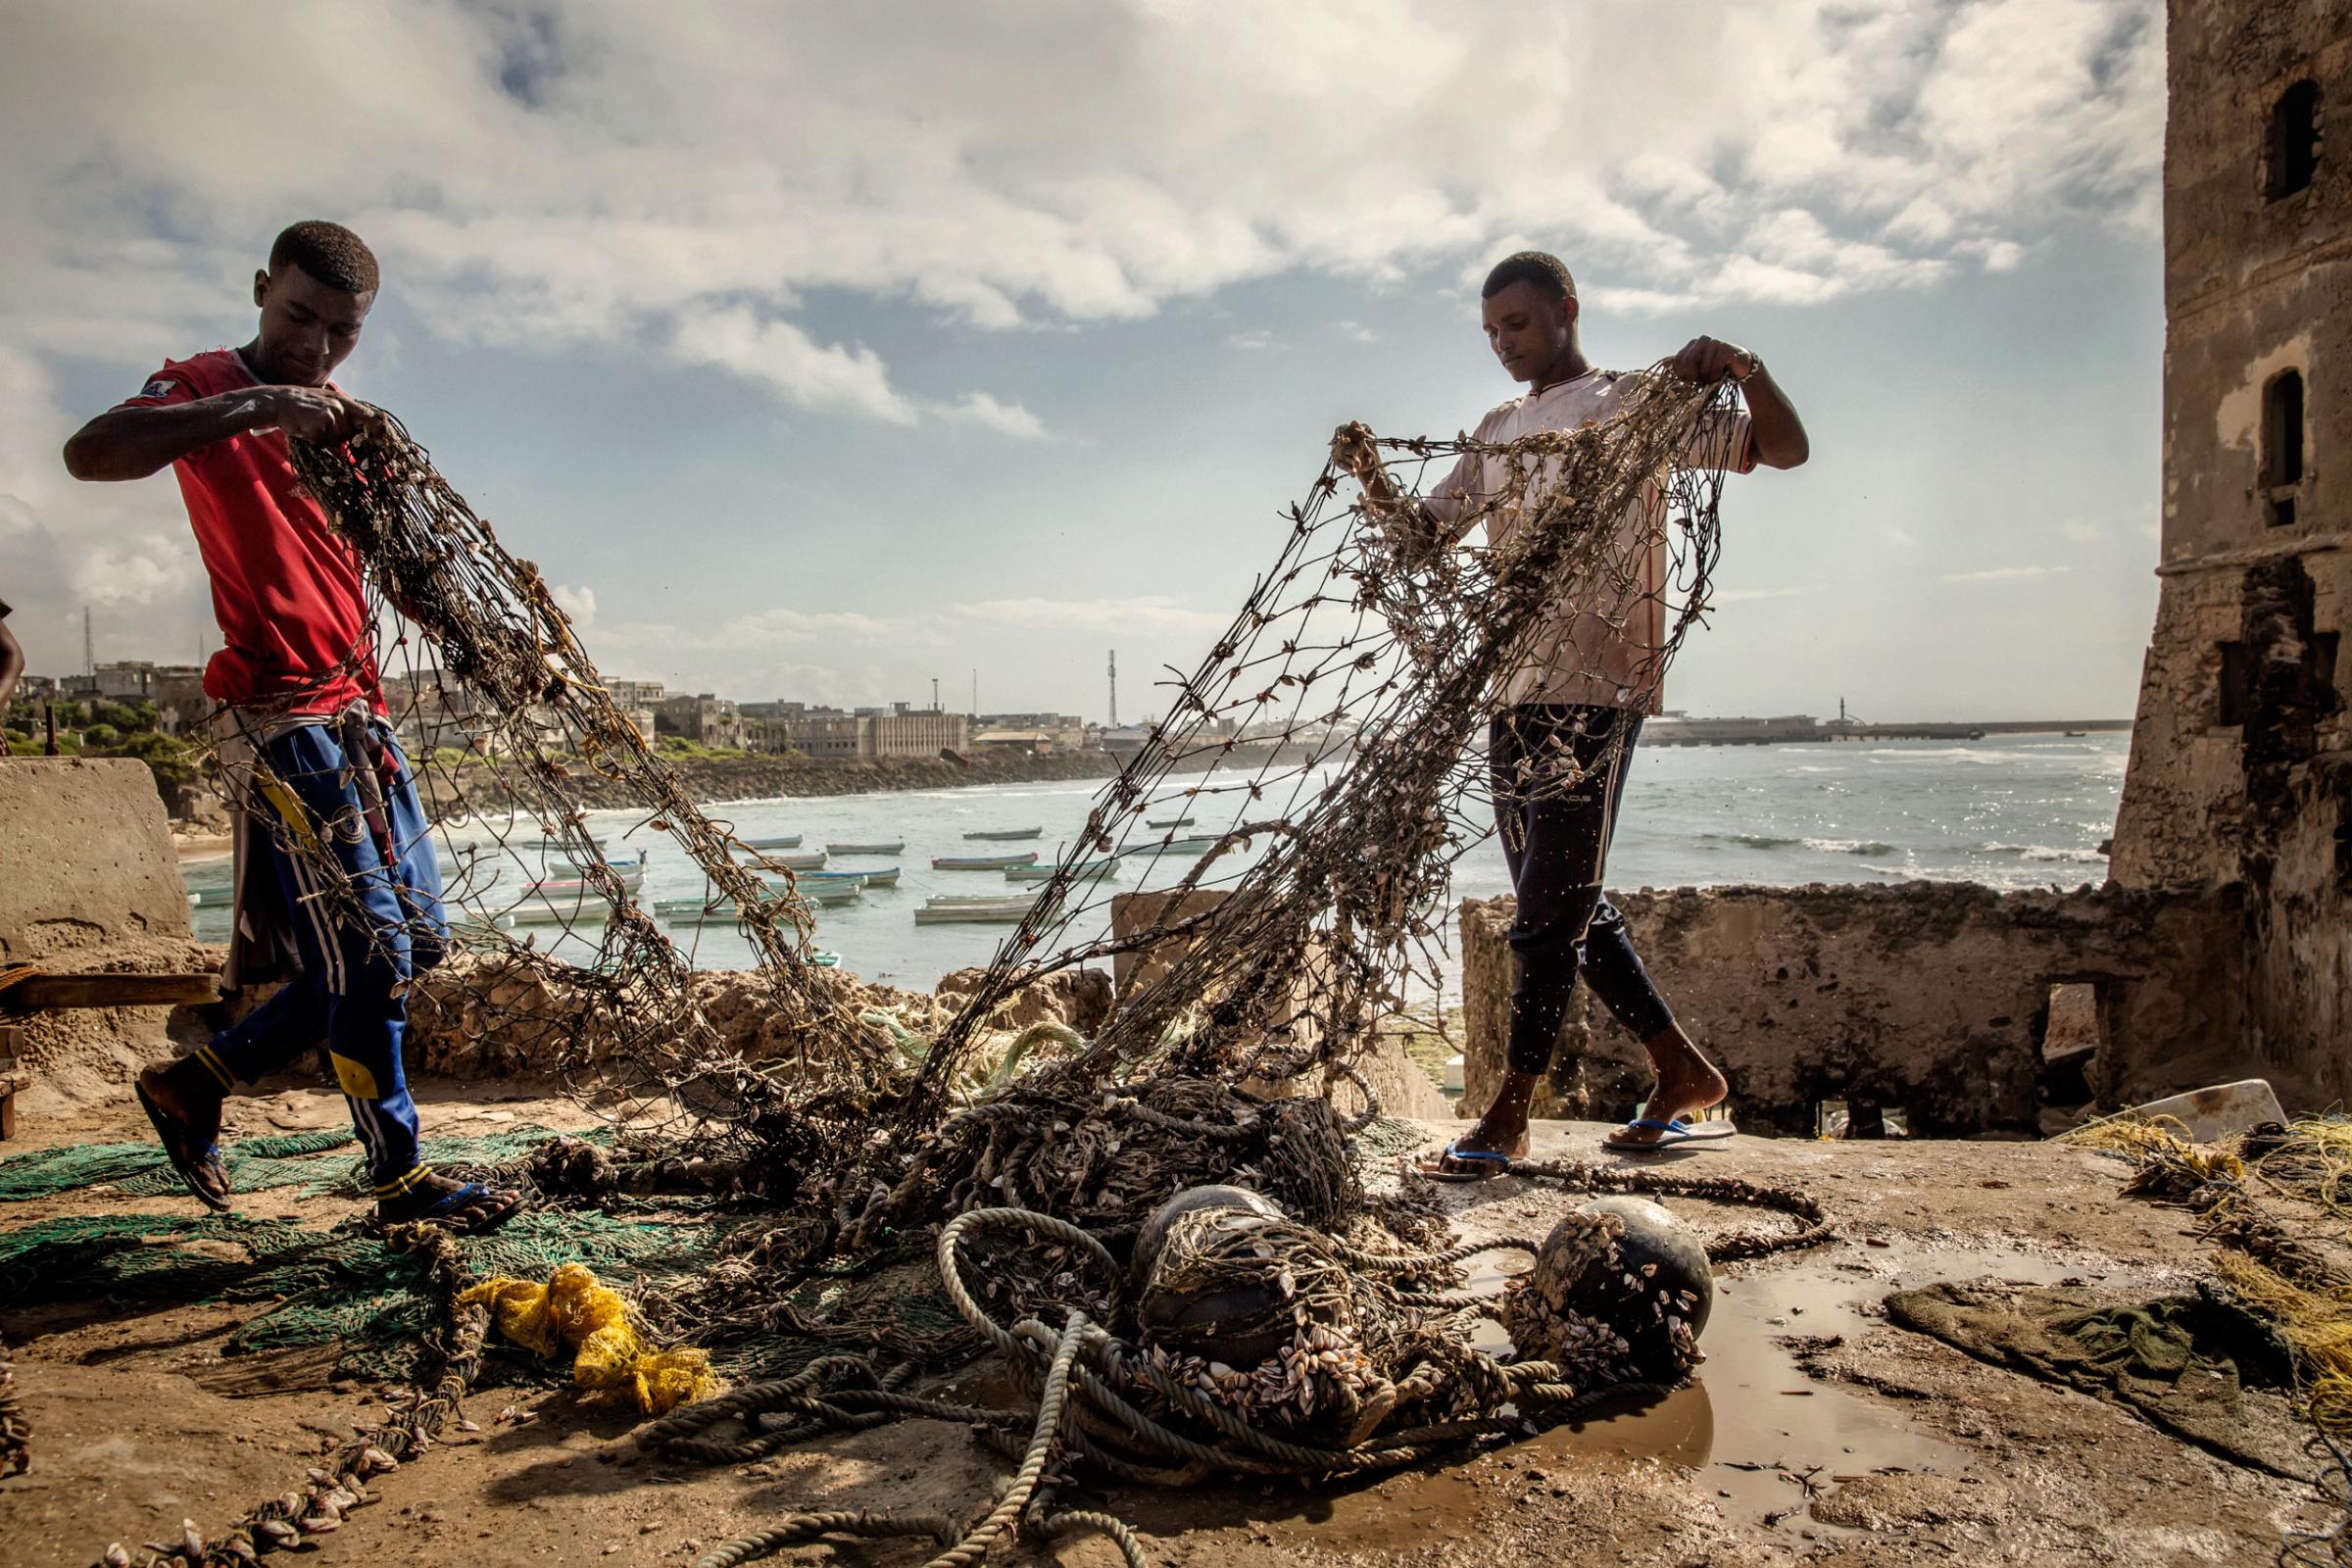 Two sailors to repair sails and mend the fishing nets. The country's waters have been exploited by illegal fisheries and the economic infrastructure that once provided jobs has been ravaged. Mogadishu, Somalia, October 10, 2015.